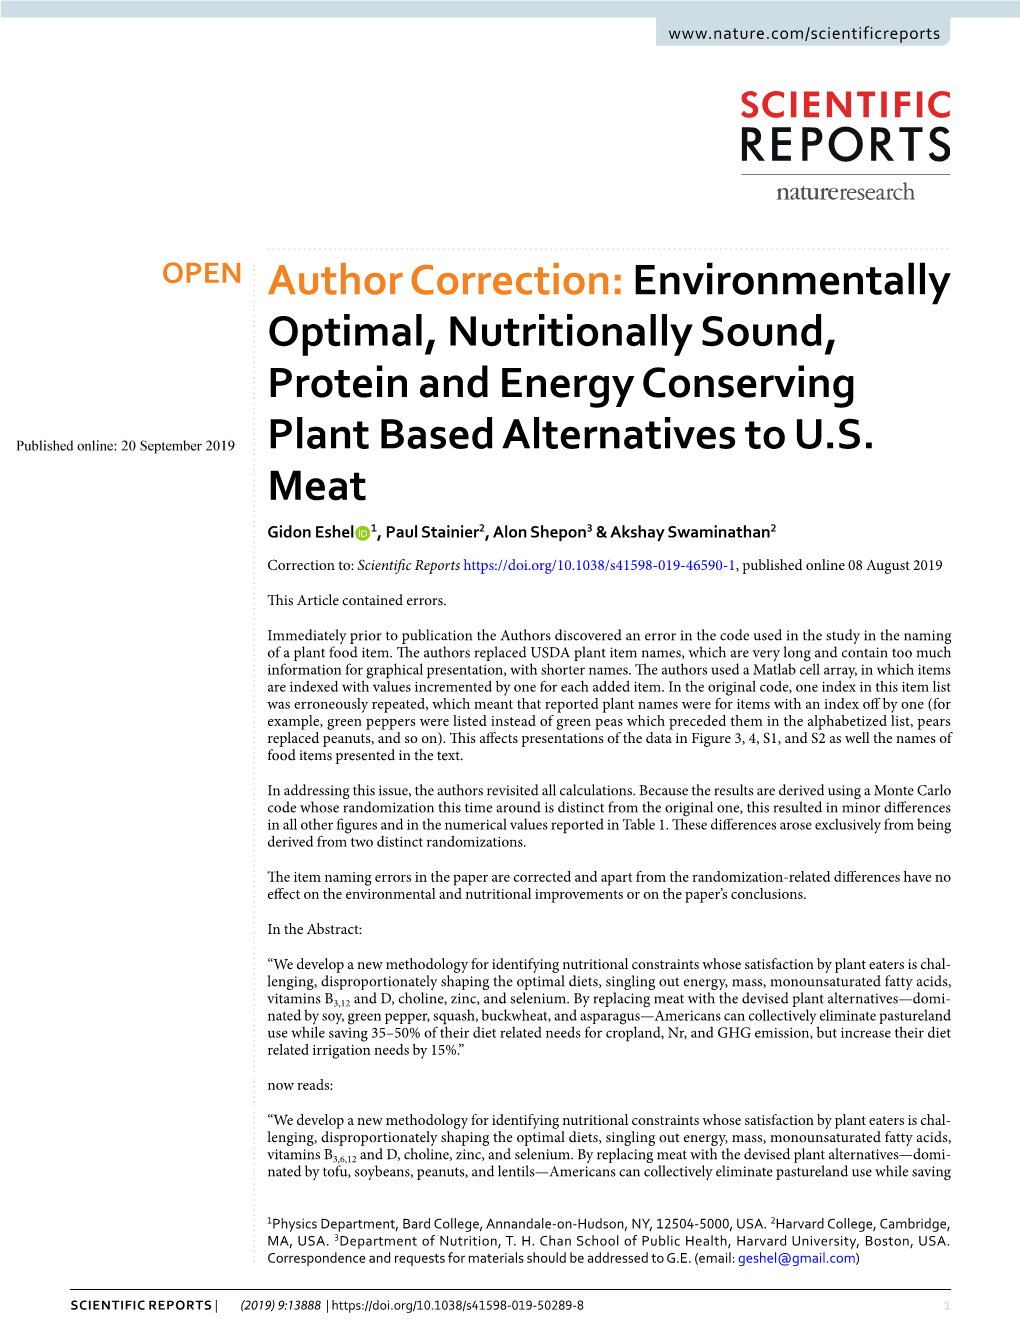 Author Correction: Environmentally Optimal, Nutritionally Sound, Protein and Energy Conserving